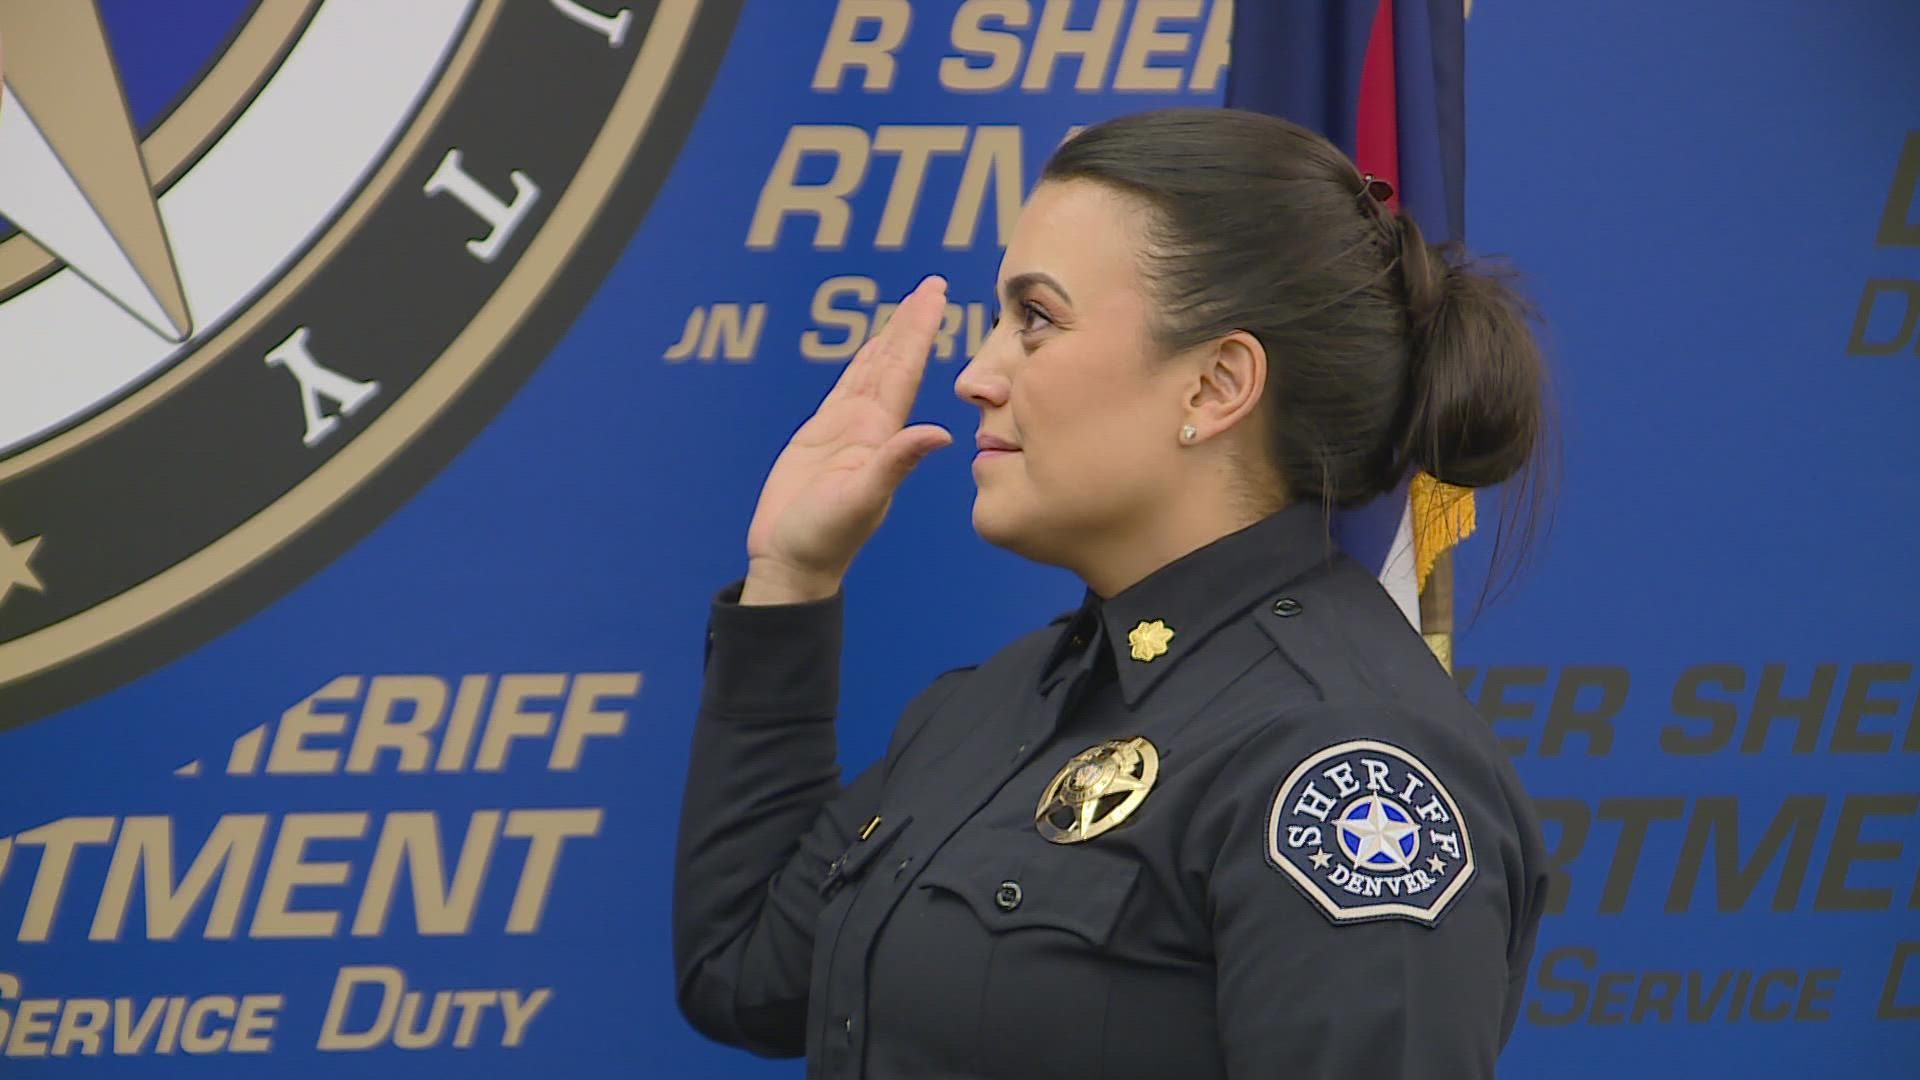 Janelle Orozco worked her way up through the ranks from deputy, to sergeant, then captain, and now major.